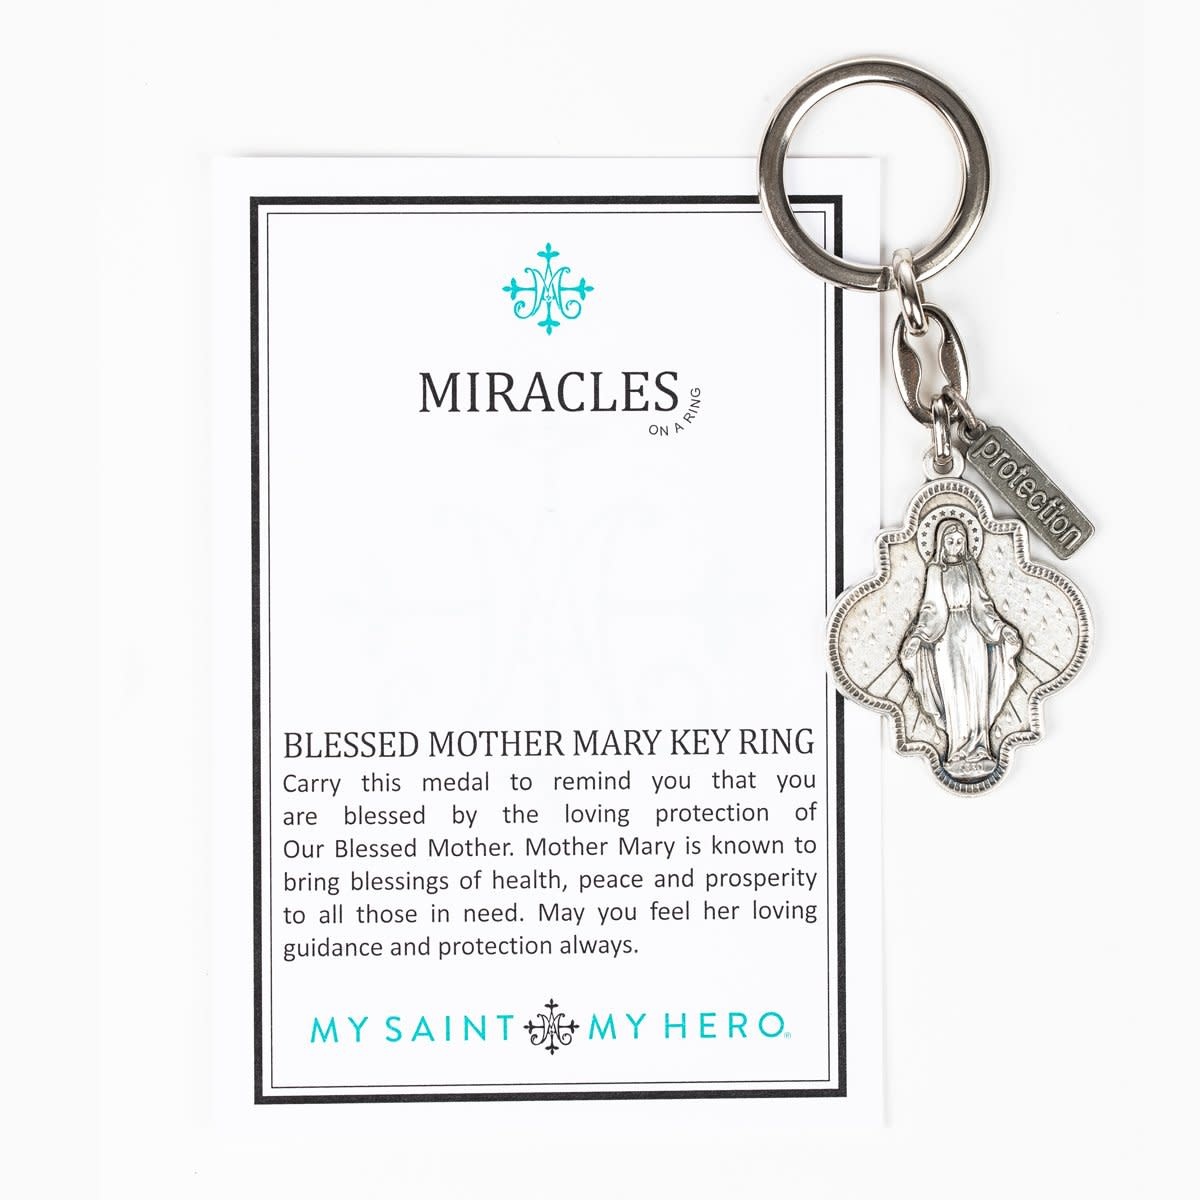 My Saint My Hero Blessed Mother Mary Miracles Key Ring